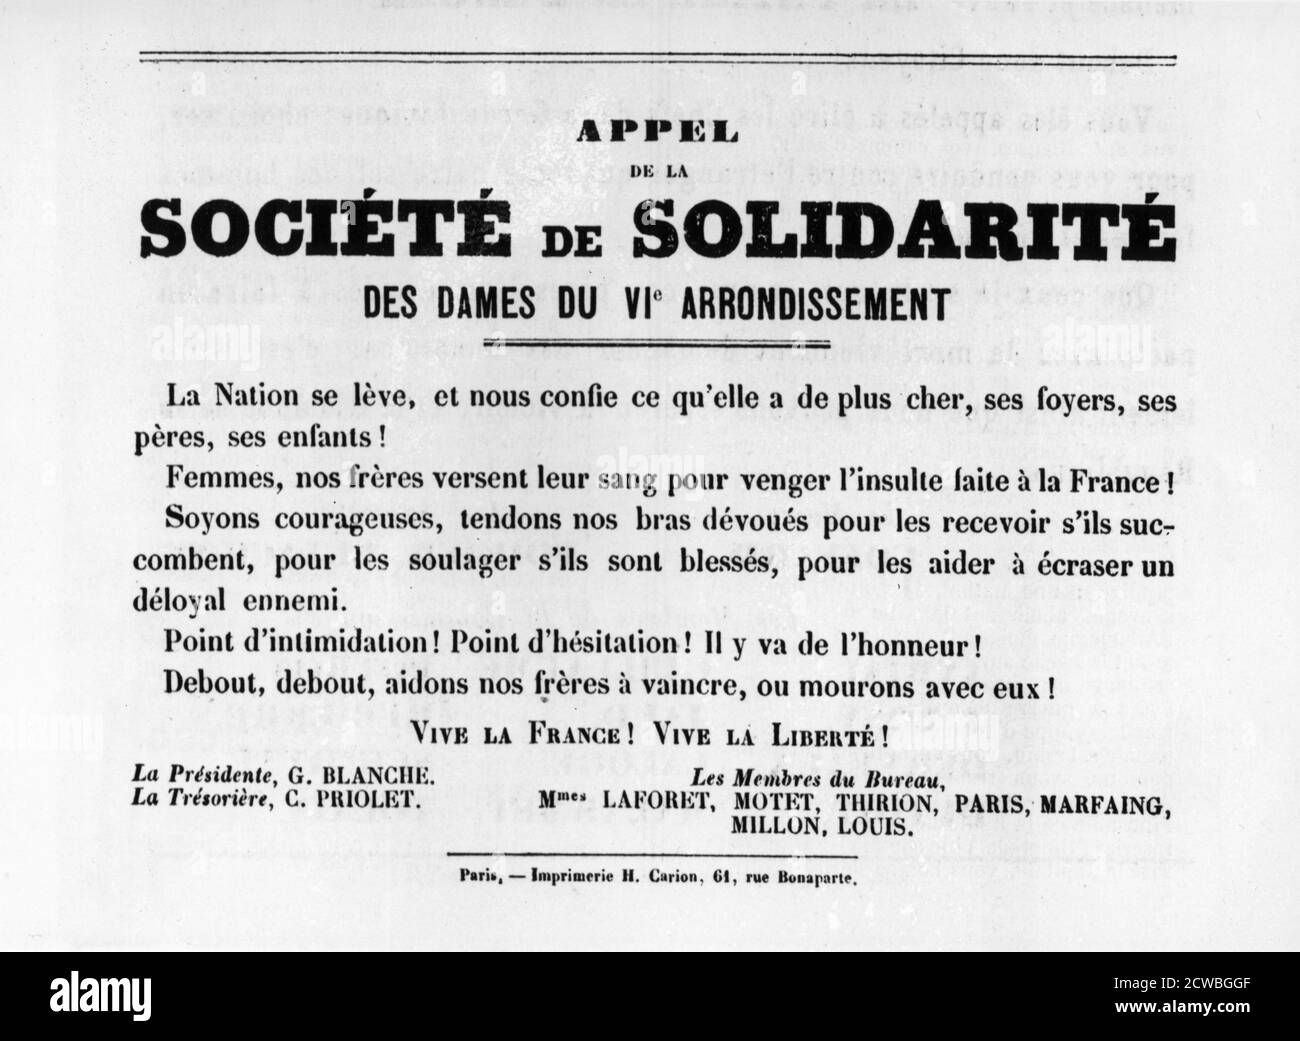 Societe de Solidarite, from French Political posters of the Paris Commune, May 1871. Stock Photo